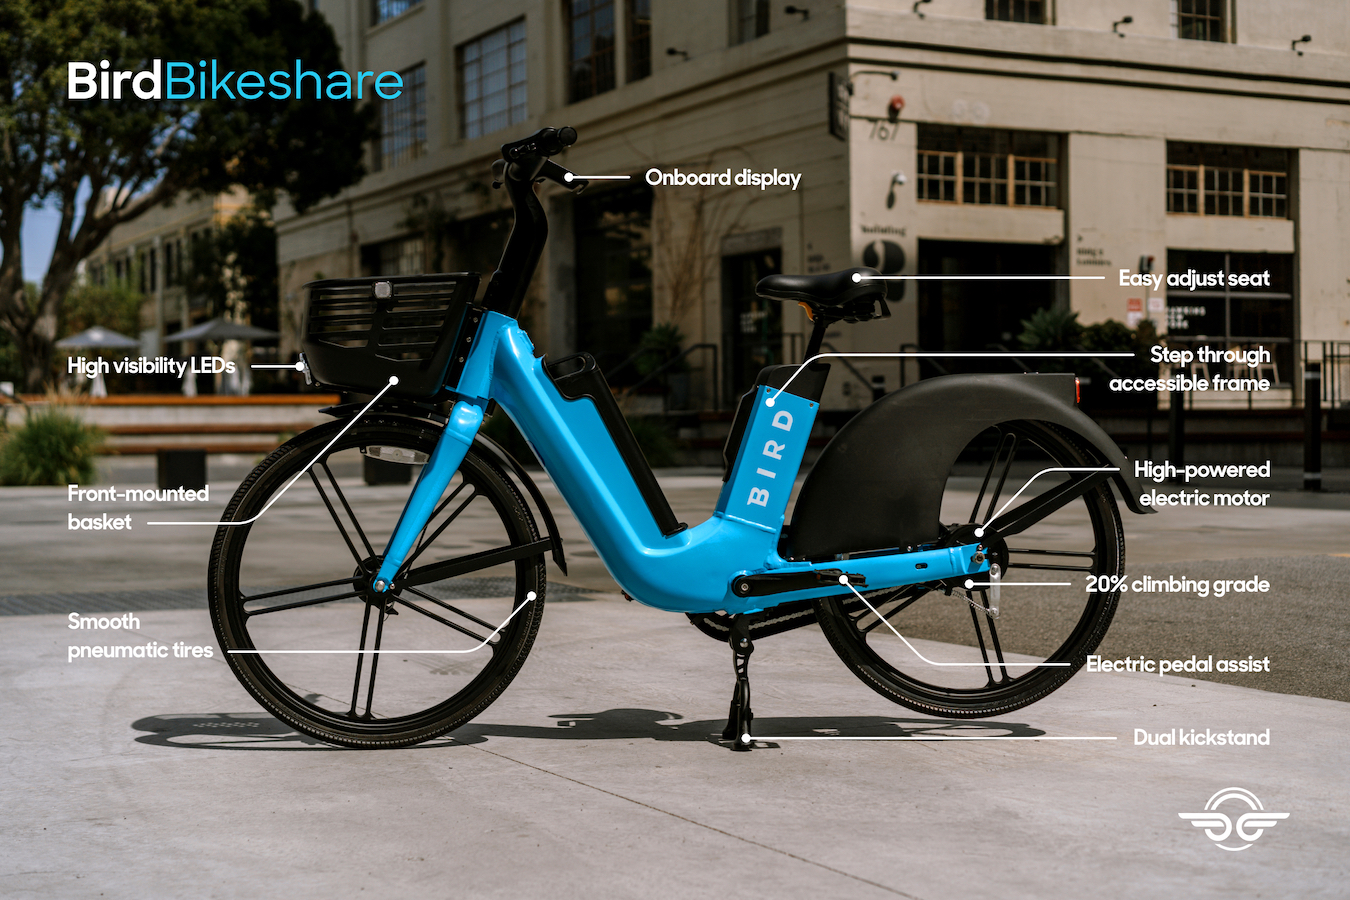 Bird Bike unveiled as shared electric bike, adding to Bird's escooter